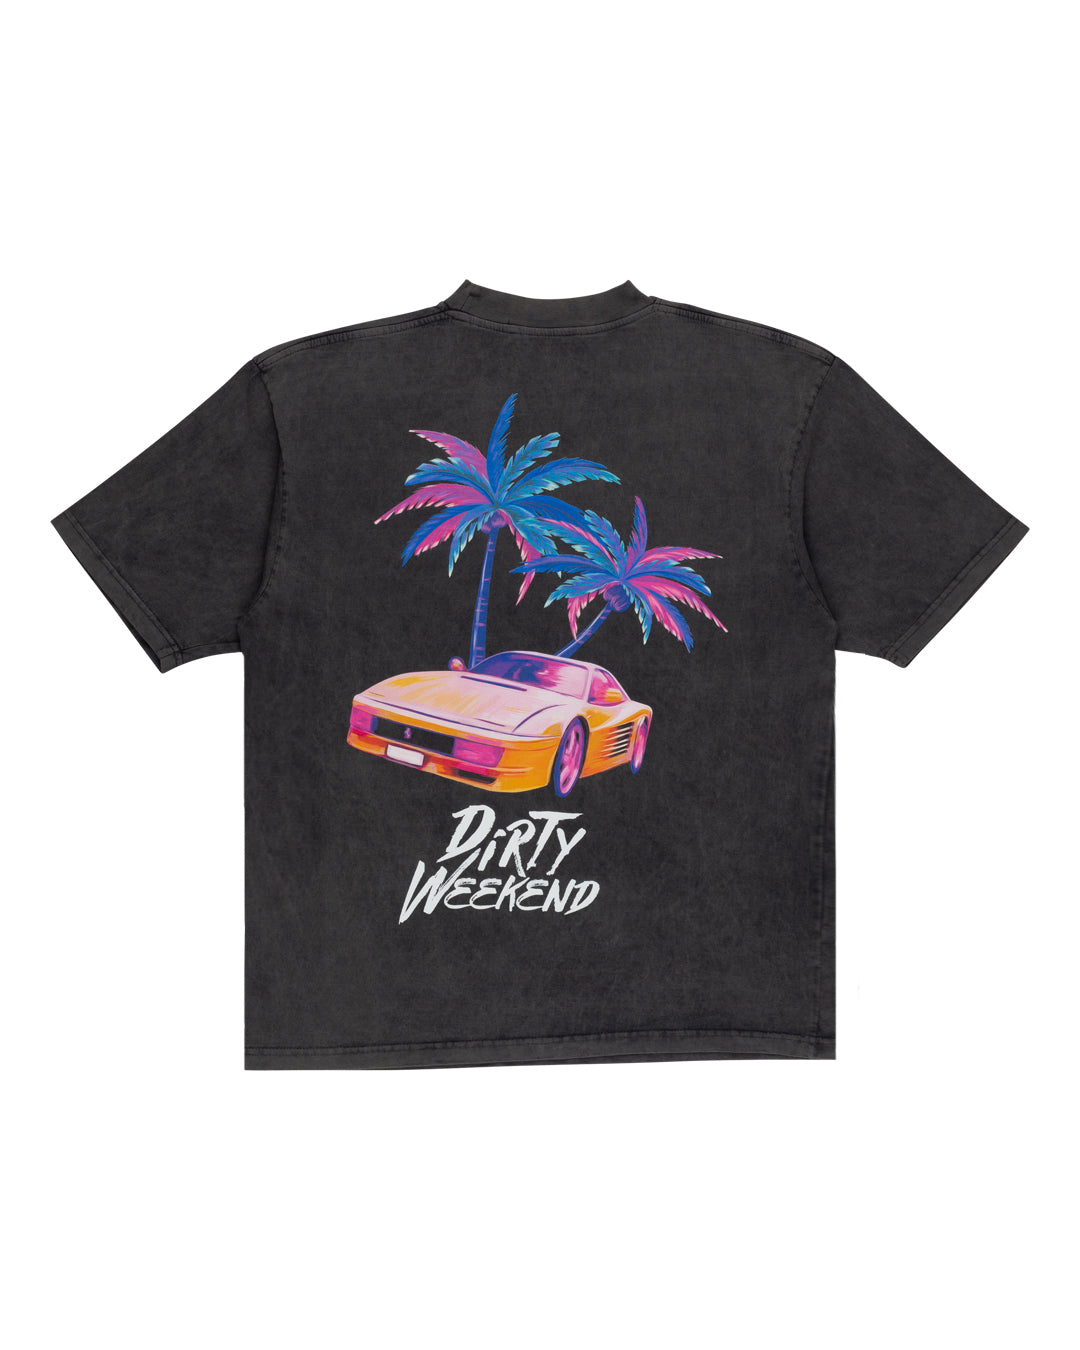 Dirty Weekend Oversized Fit T-Shirt in Black, White, Brown, and Vintage Gray